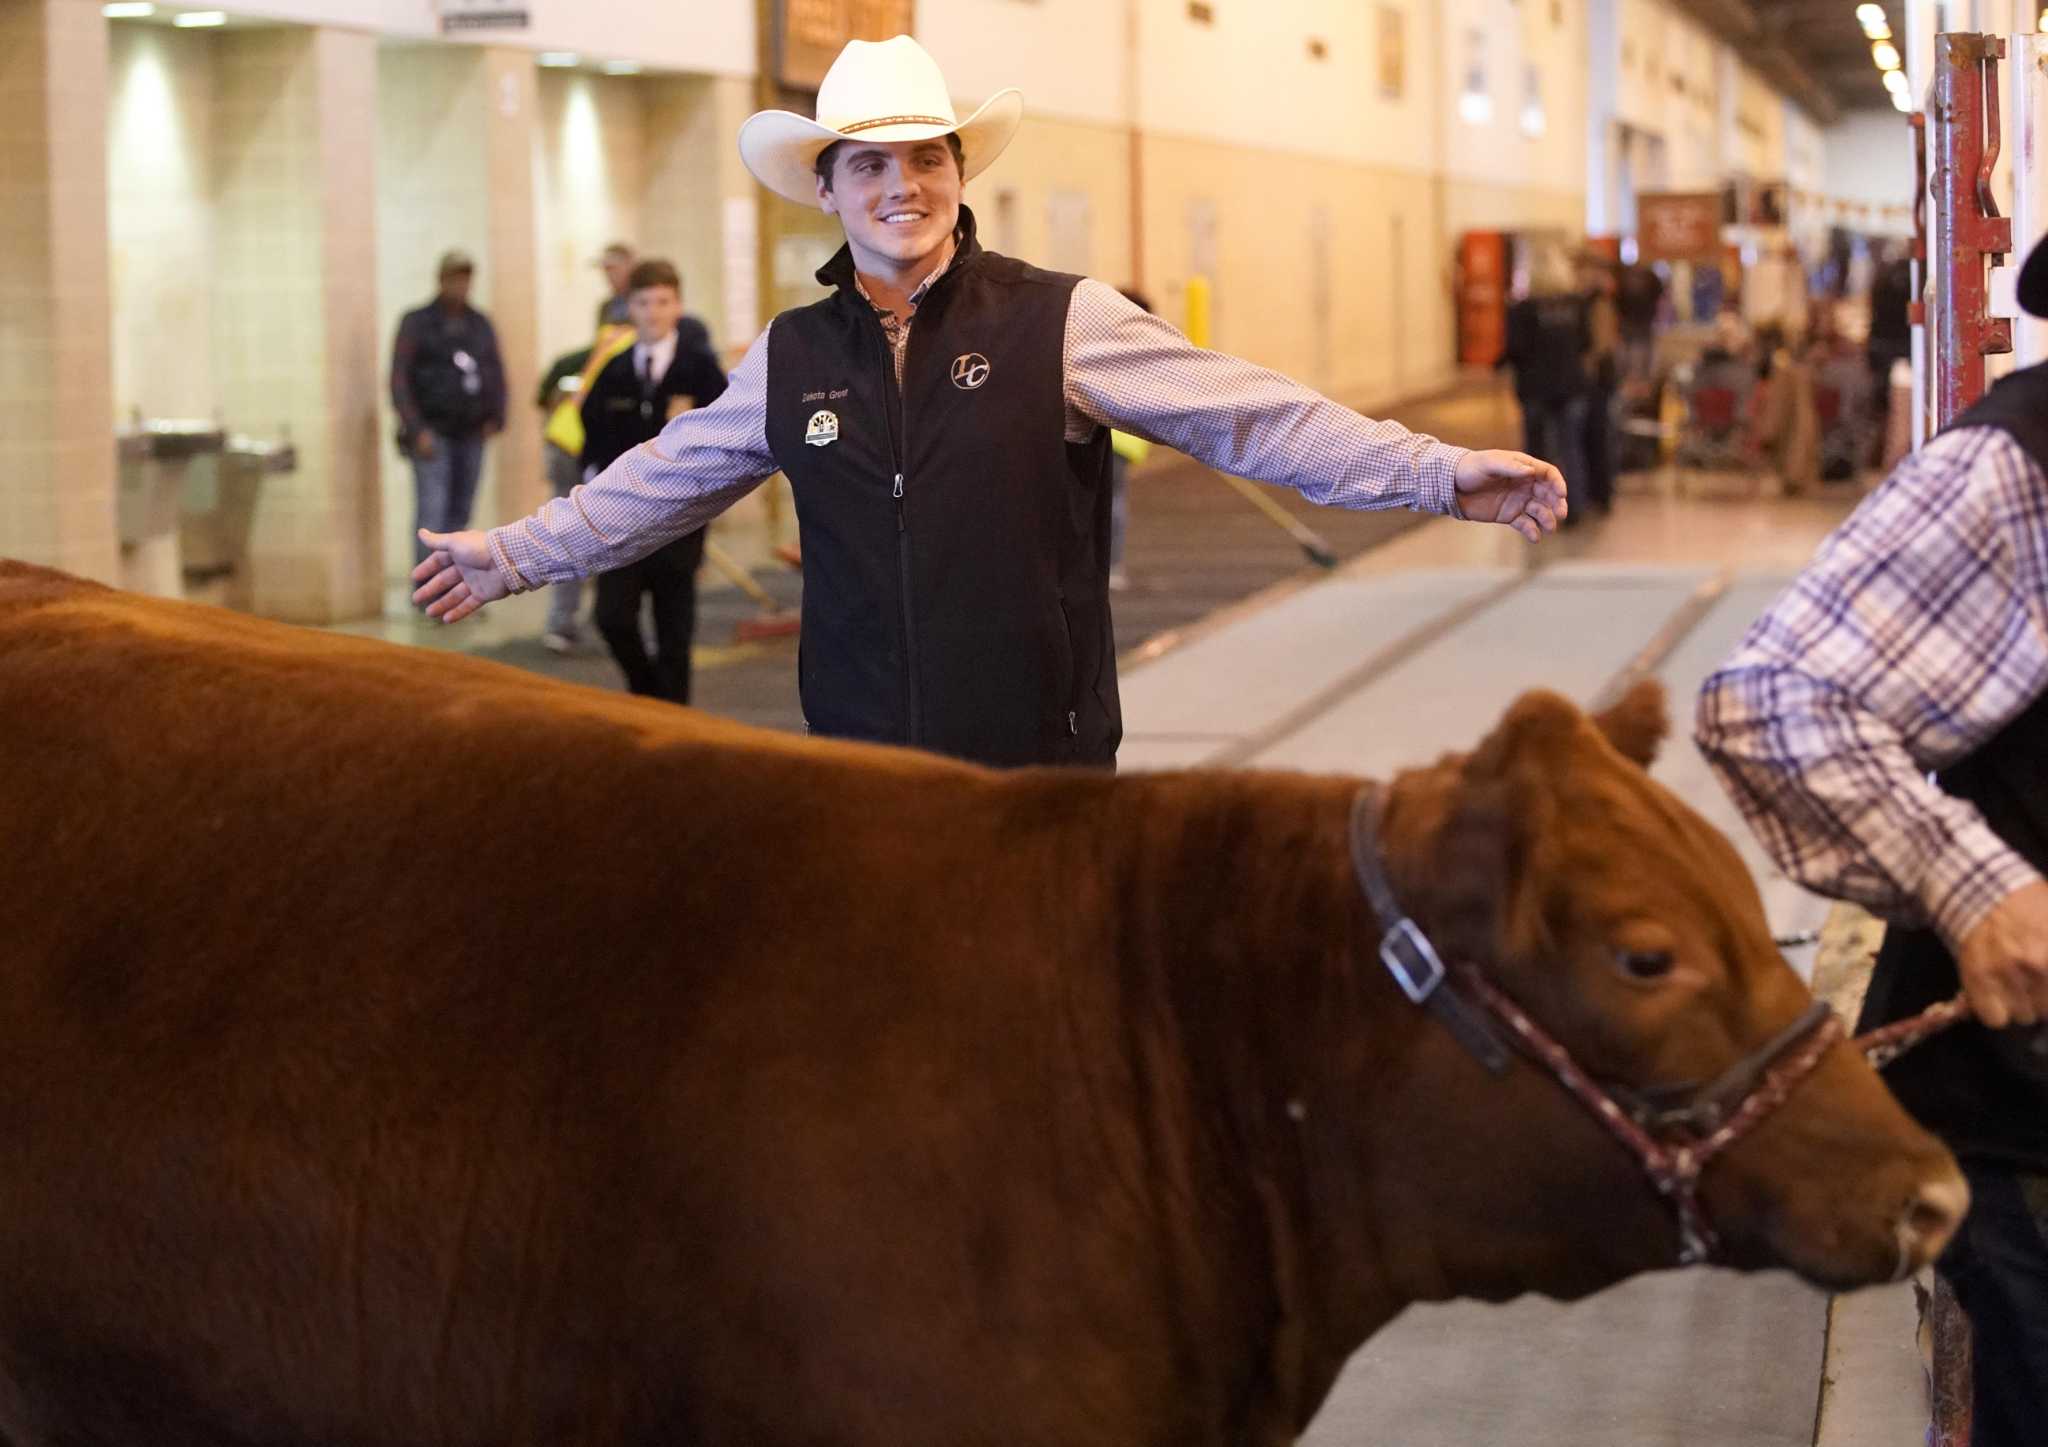 Thousands of volunteers make Houston Livestock Show and Rodeo possible